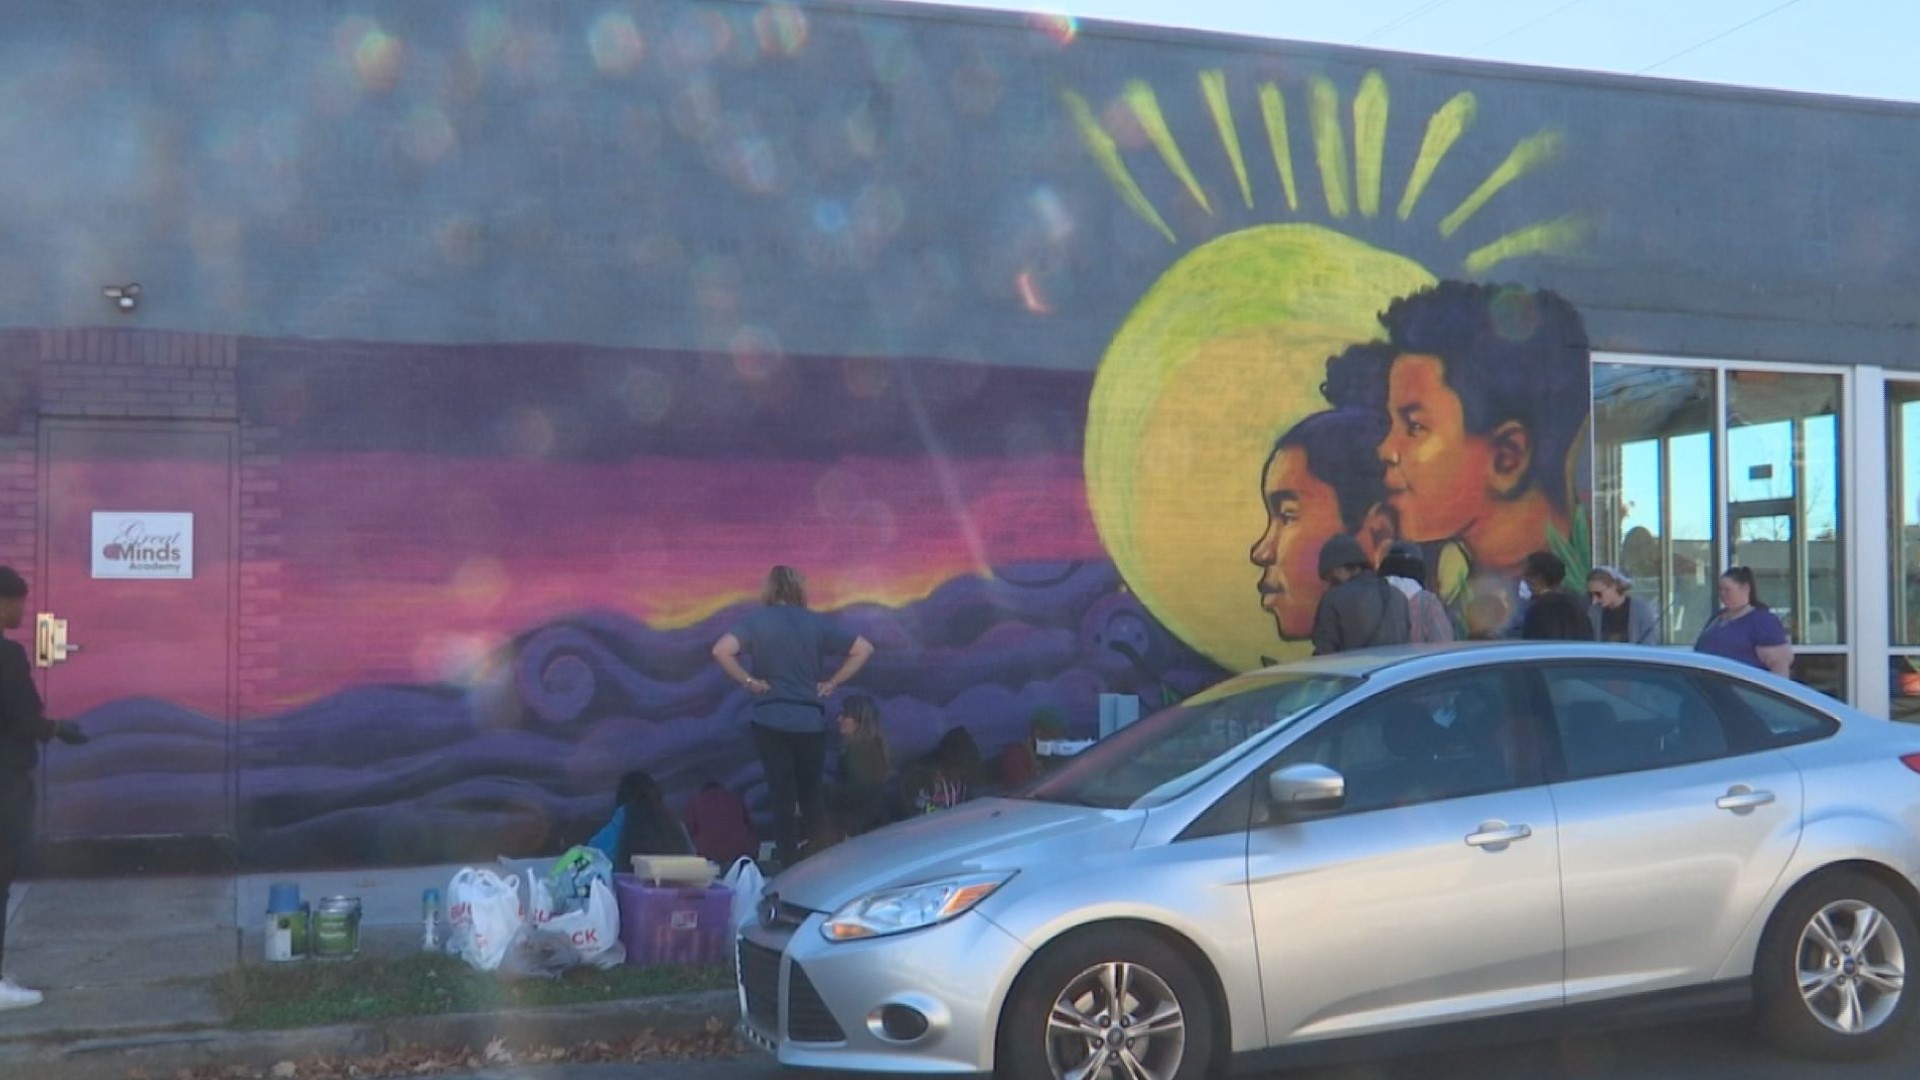 Organizers said the mural should be finished over the weekend. The organization is working to create 10 murals in a two-year span.